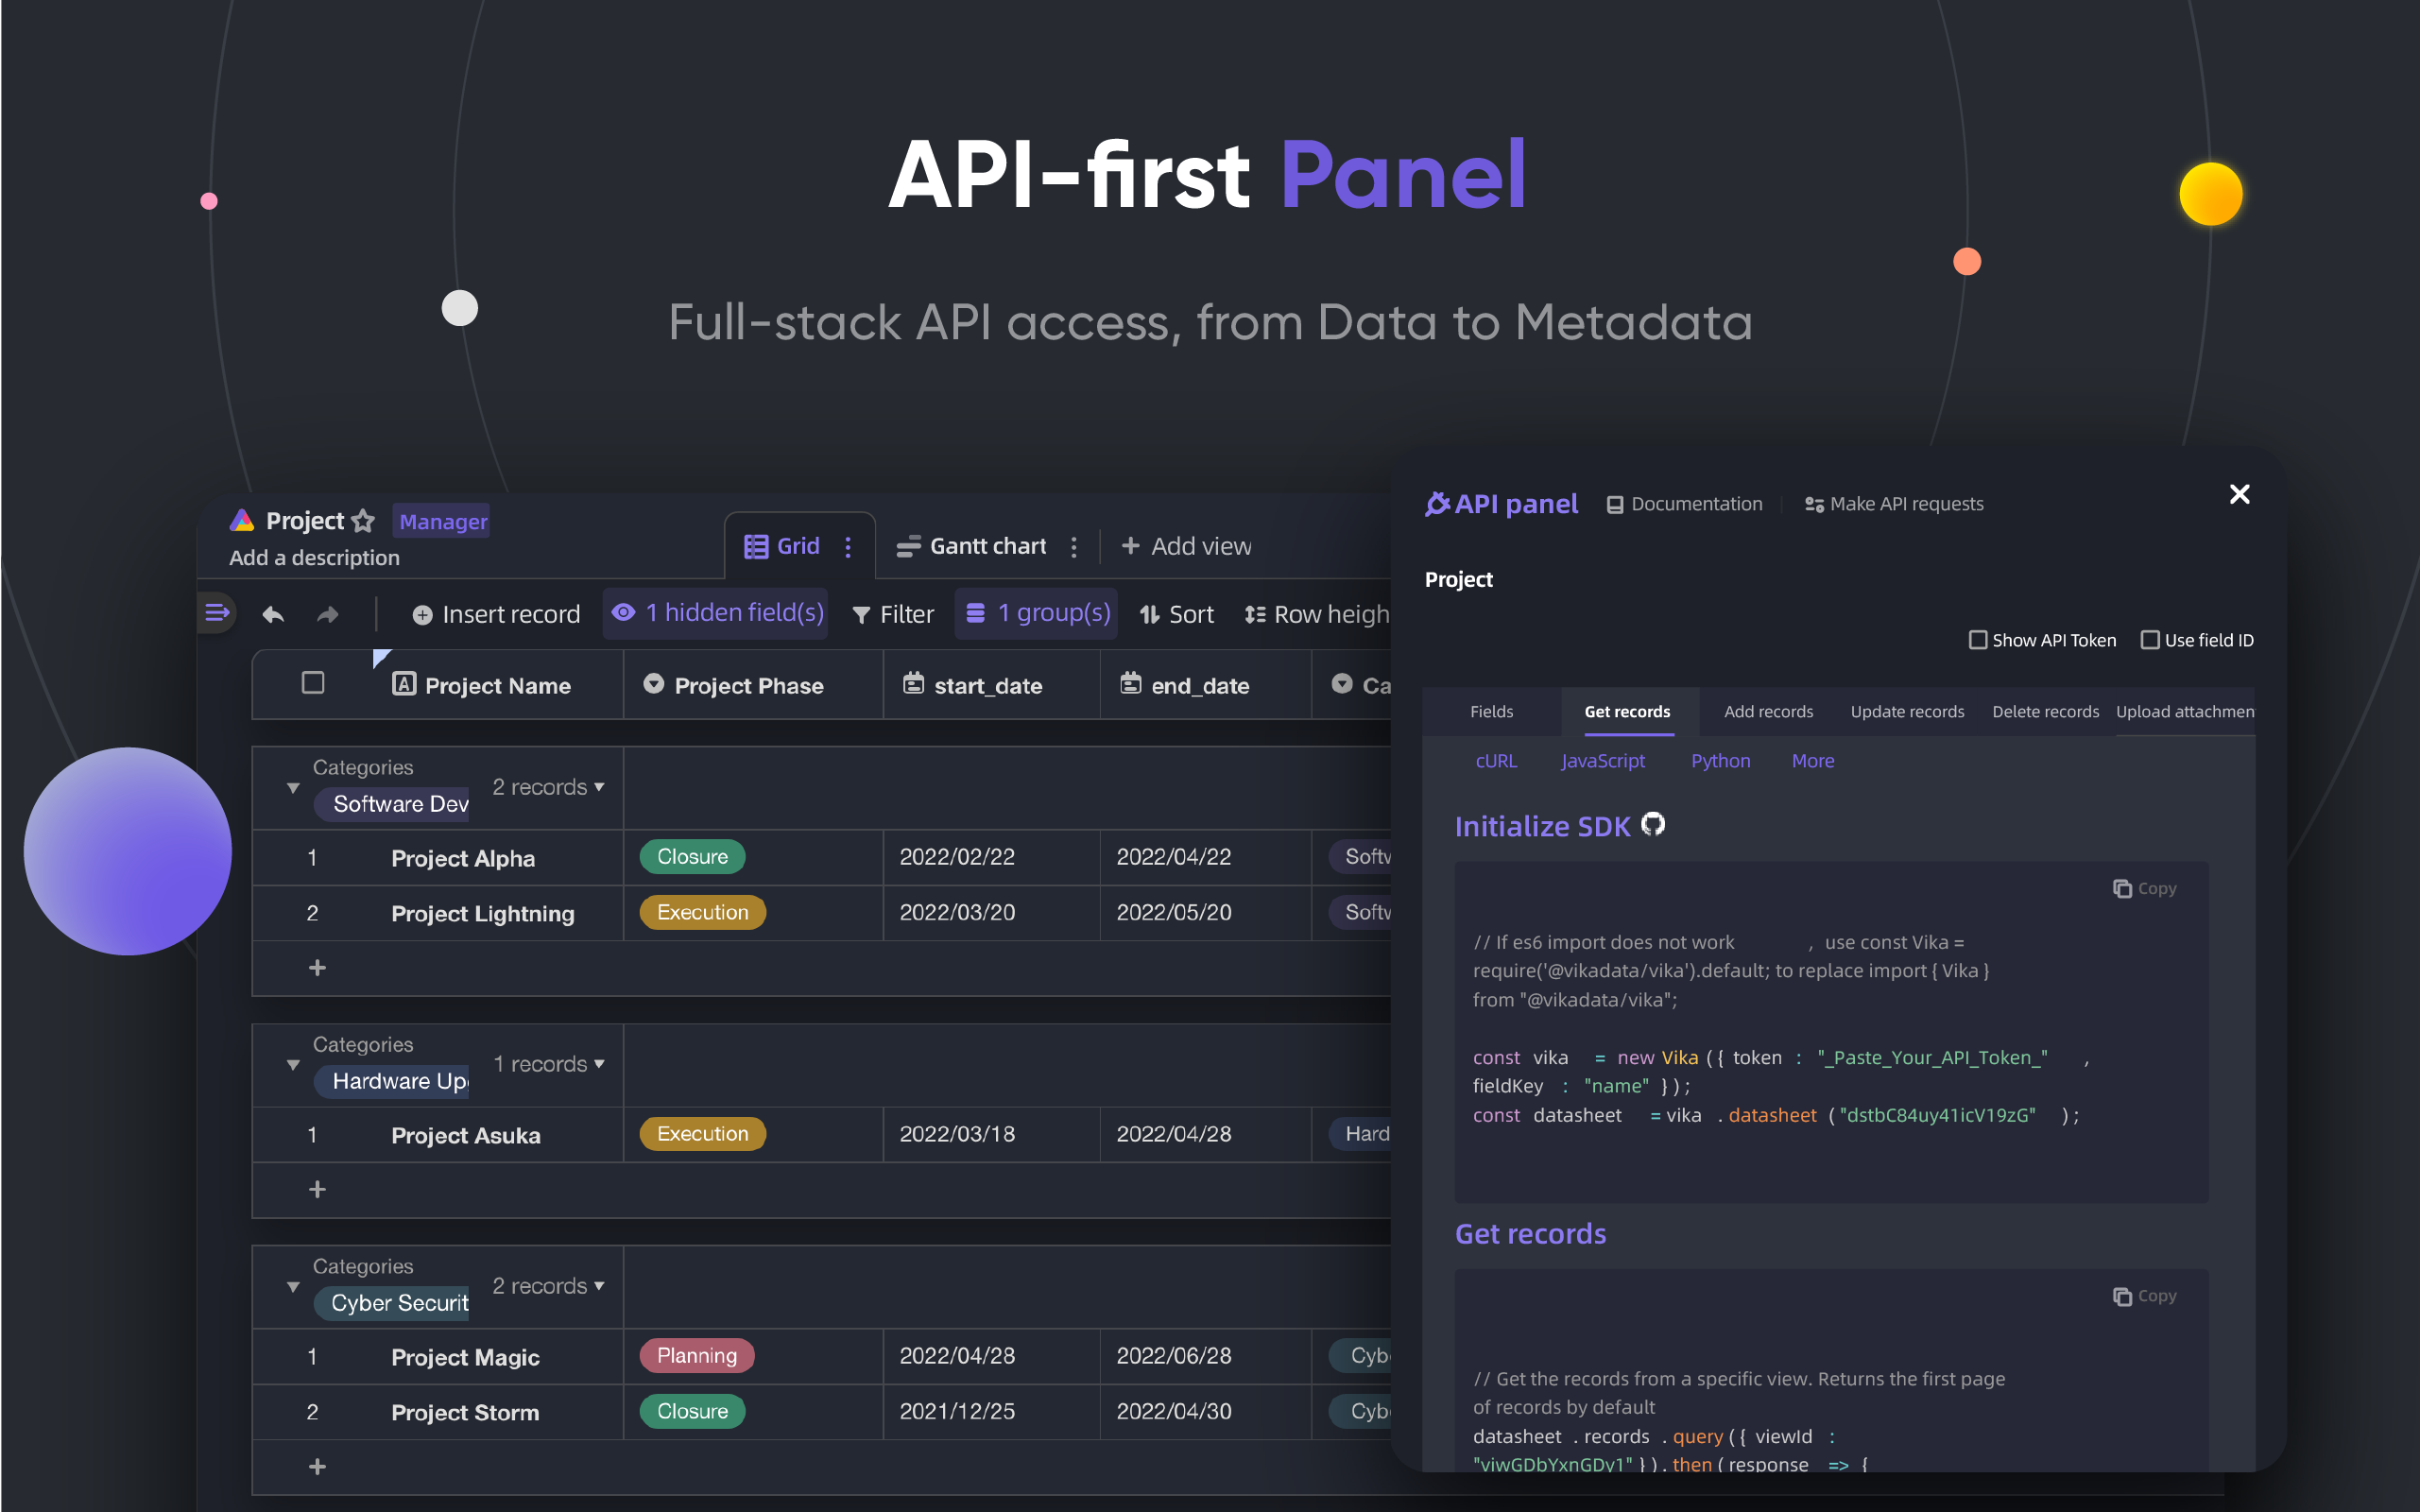 AITable Full-stack API access, from data to metadata